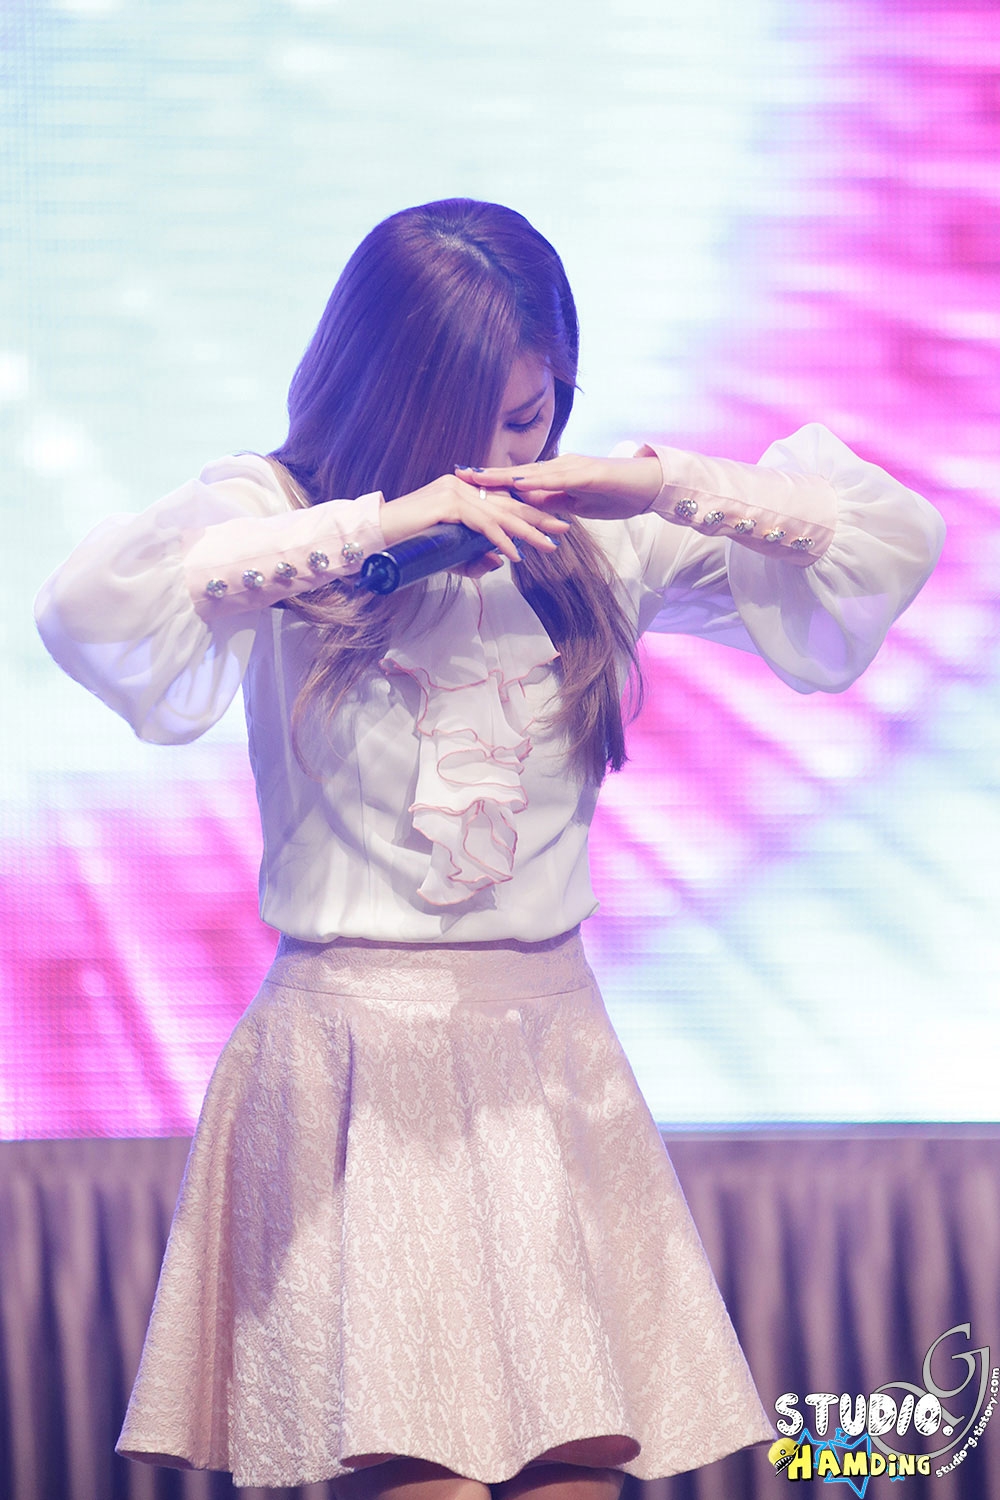 A Pink Chorong ASEA Aviation College Concert